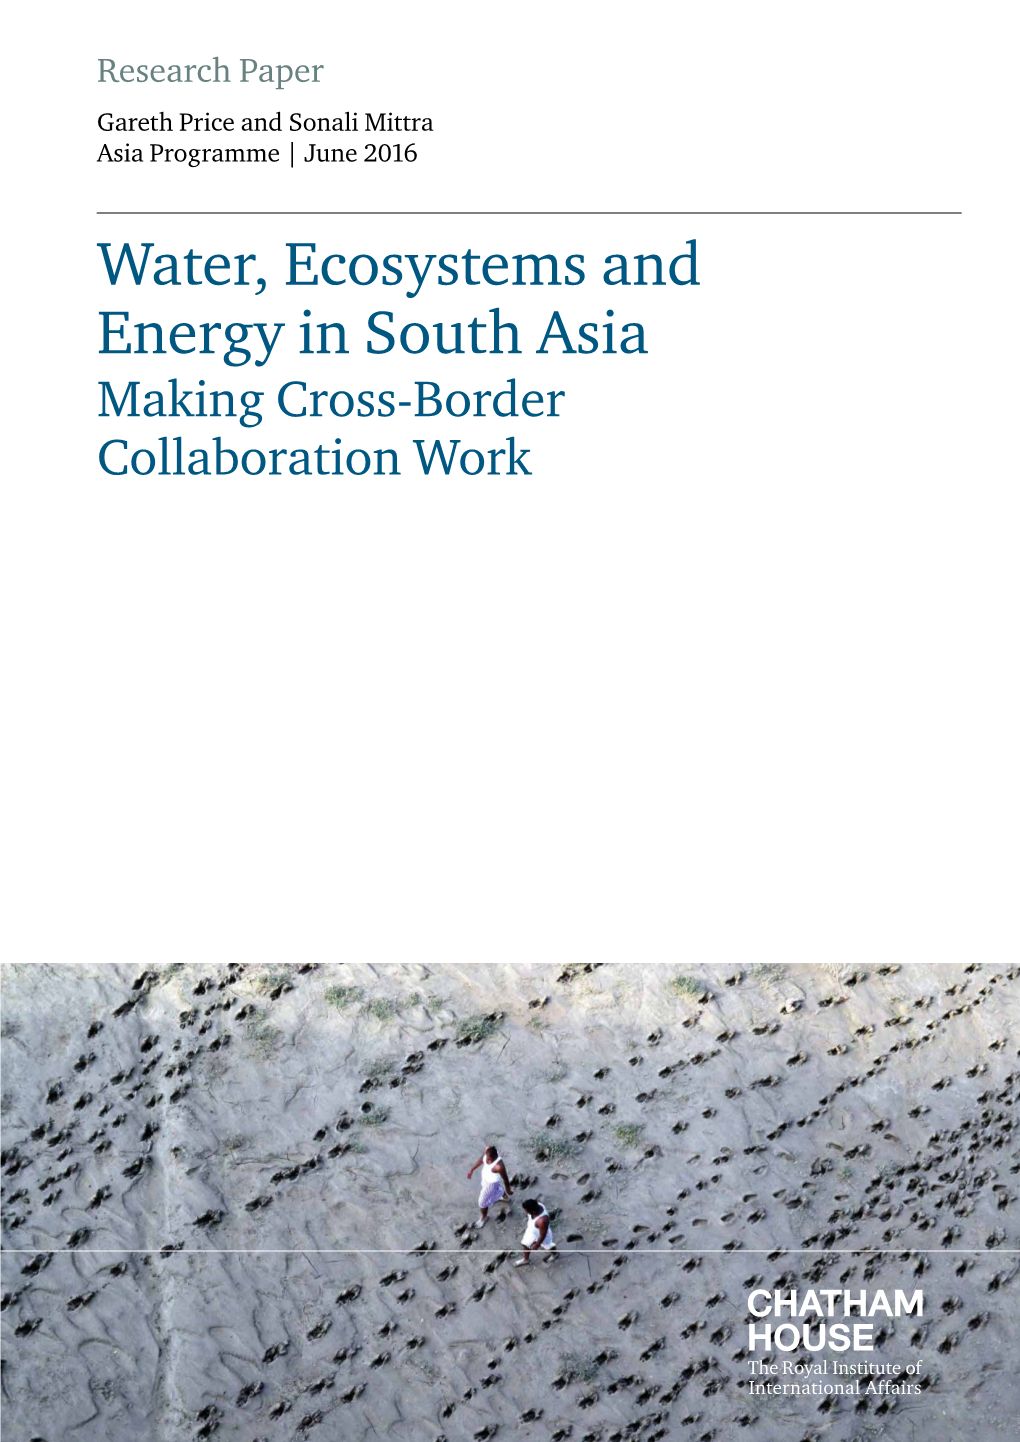 Water, Ecosystems and Energy in South Asia Making Cross-Border Collaboration Work Contents